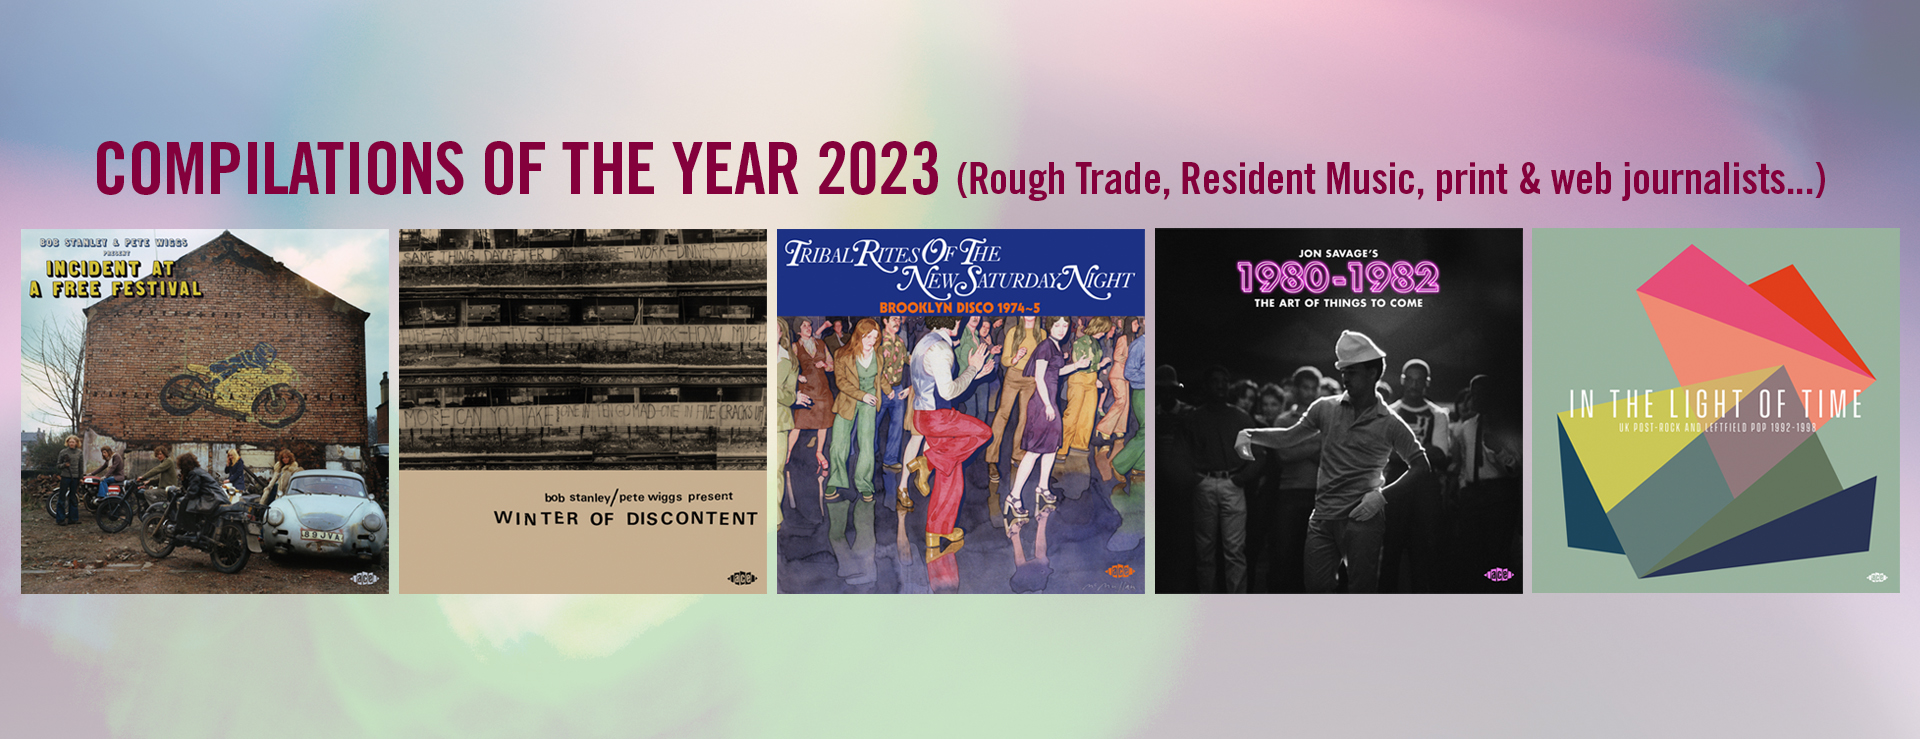 Bob Stanley Ace Records series, Incident at a Free Festival, Winter of Discontent, Tribal Rites of the New saturday Night, Jon Savage's 1980-82, In the Light of Time, Rough Trade Compilation of the Year 2023